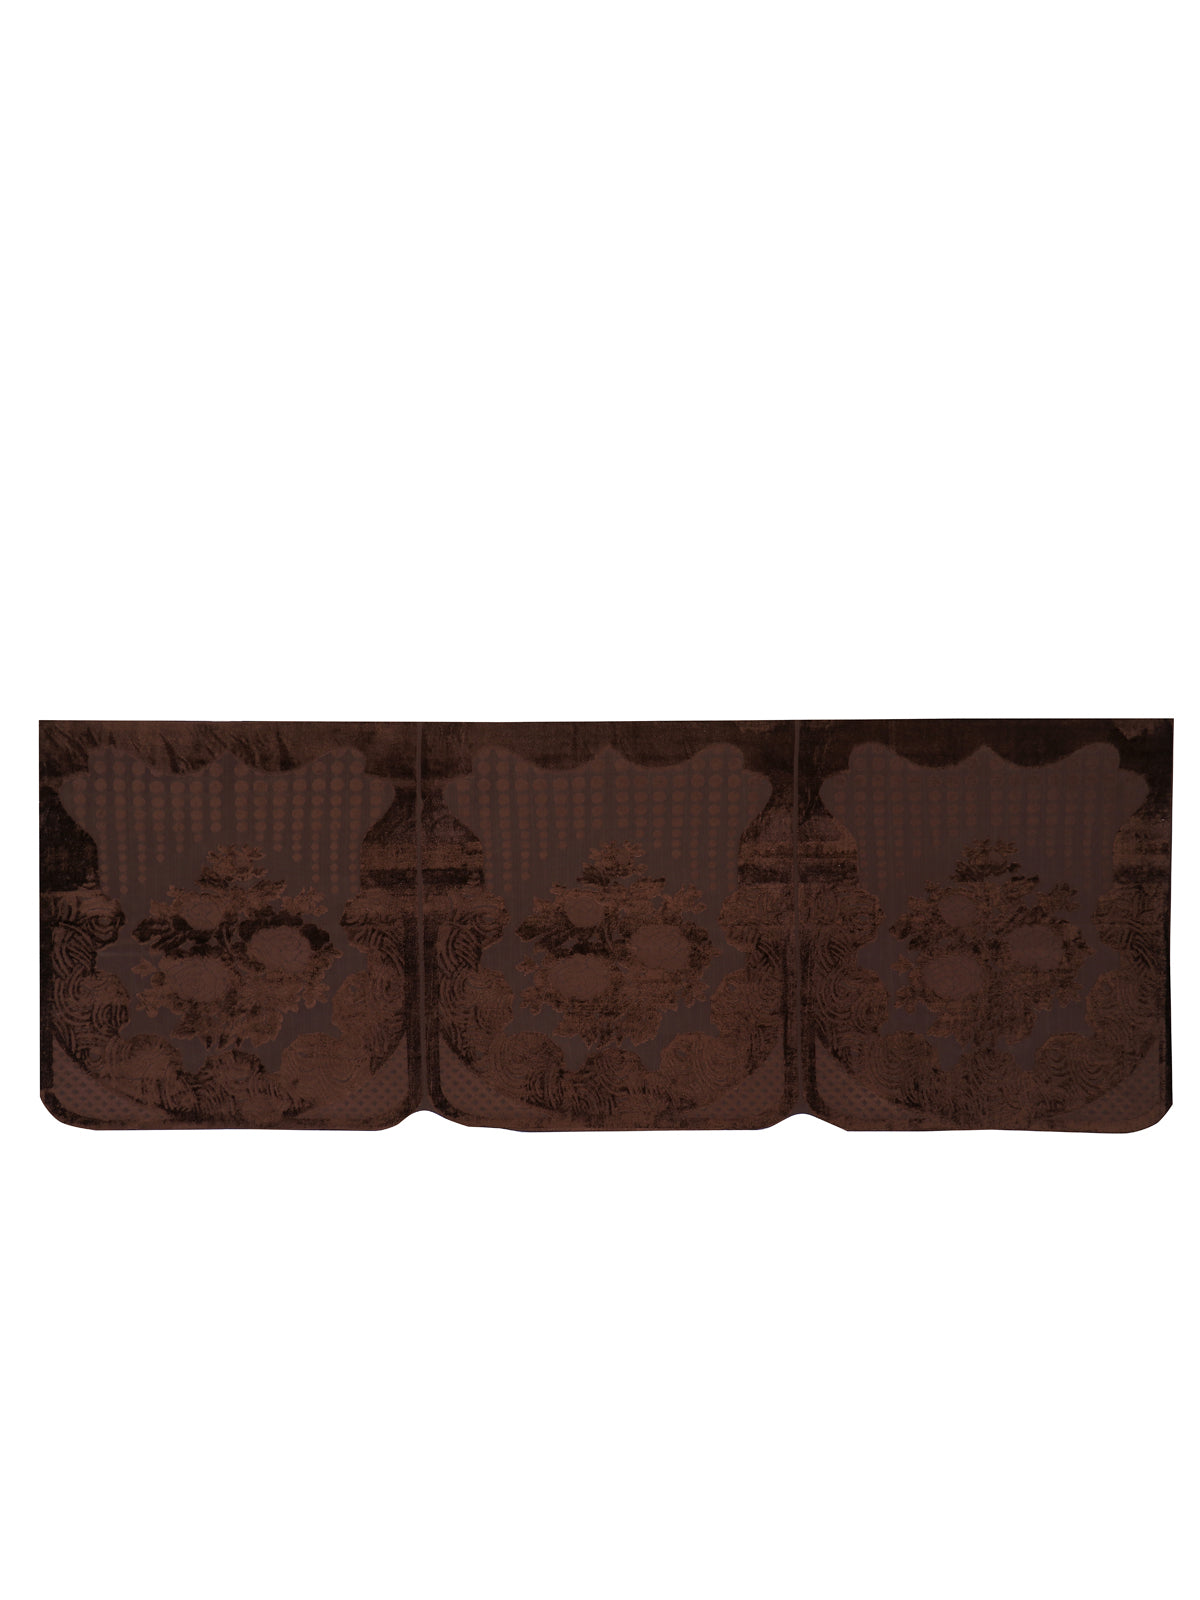 Brown Floral Patterned 5 Seater Sofa Cover Set